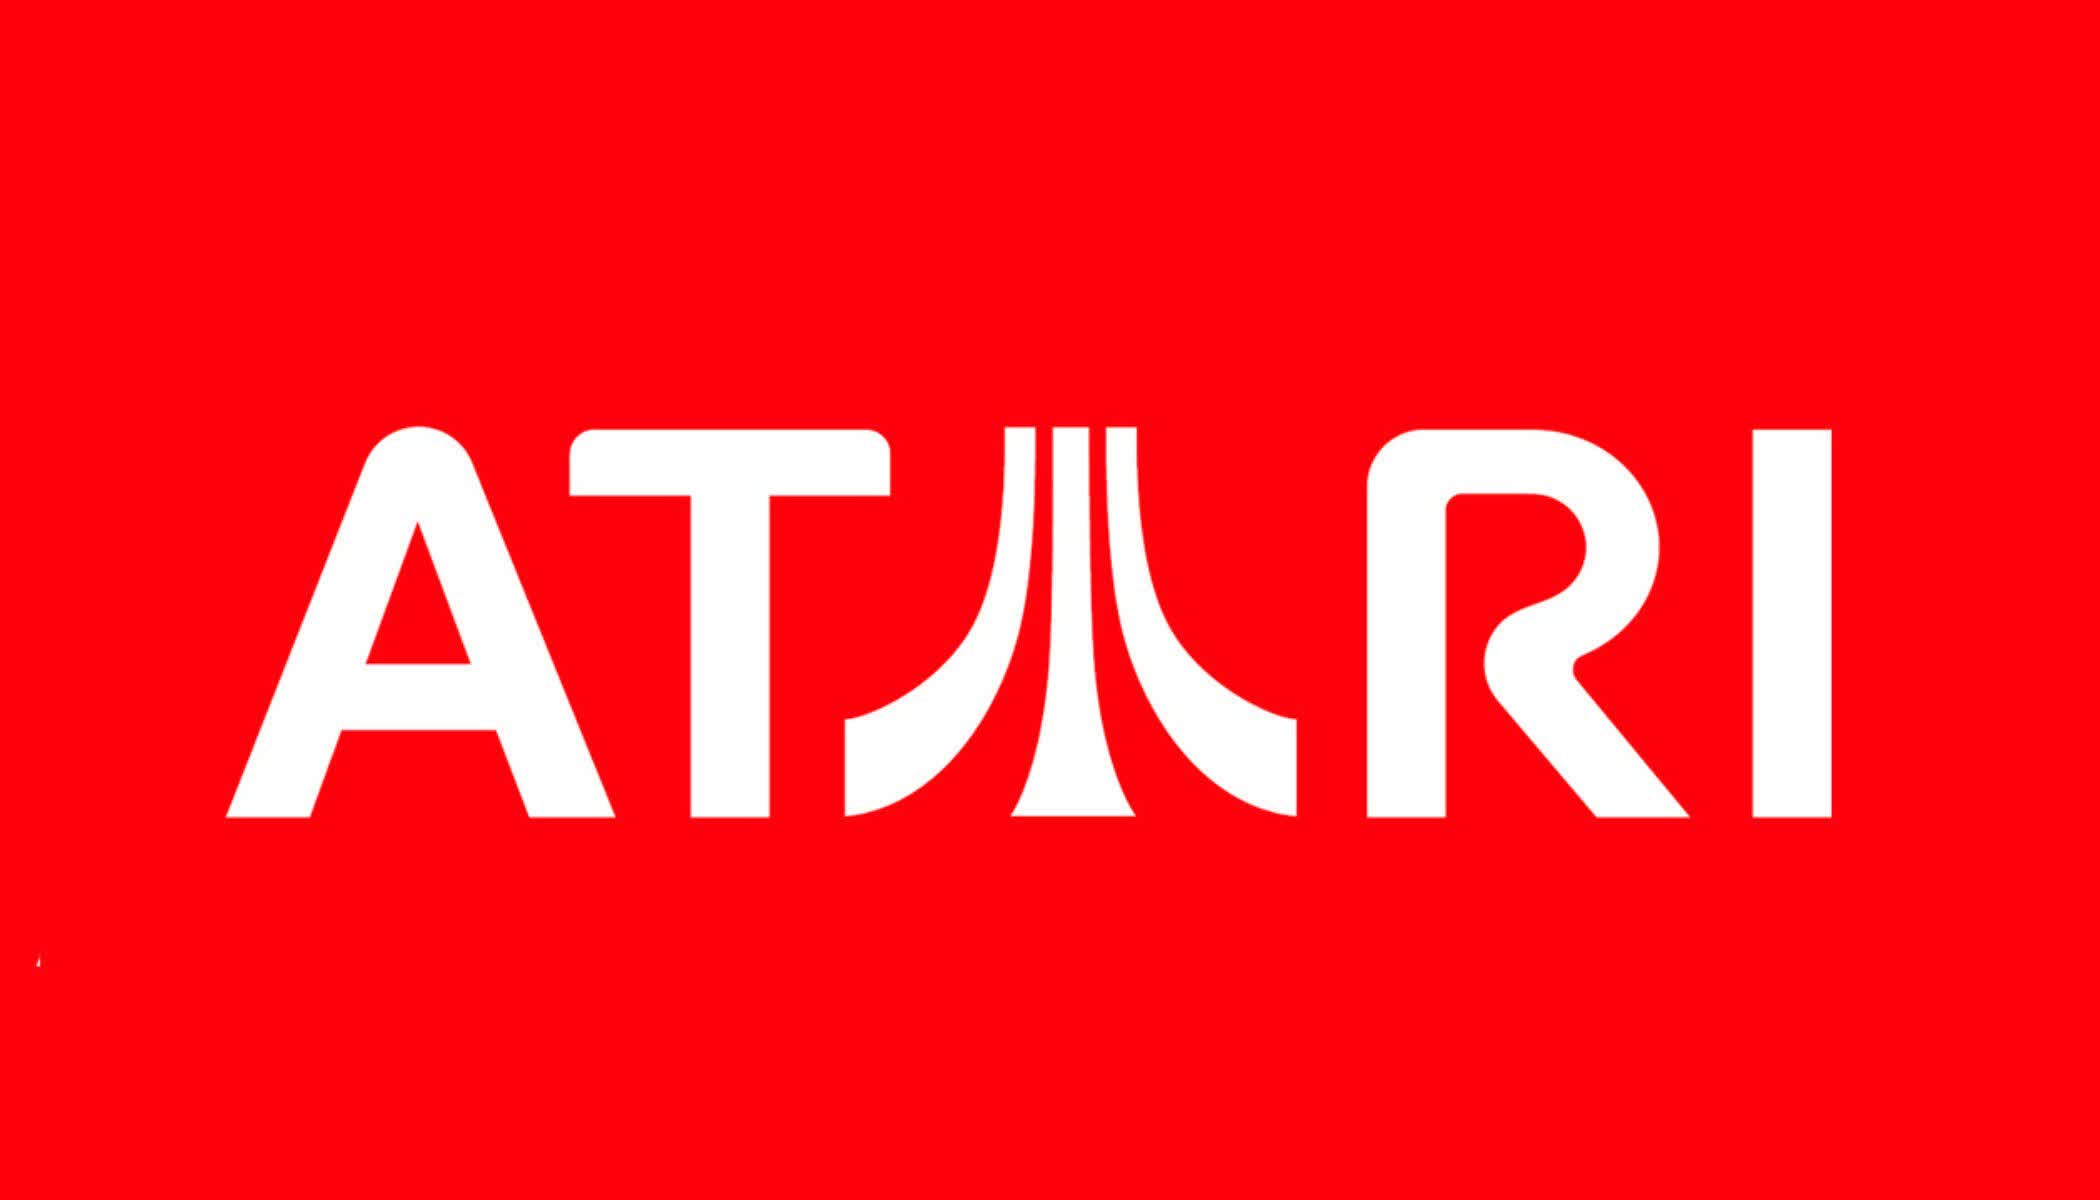 Atari pivots from free-to-play mobile titles to premium PC and console games